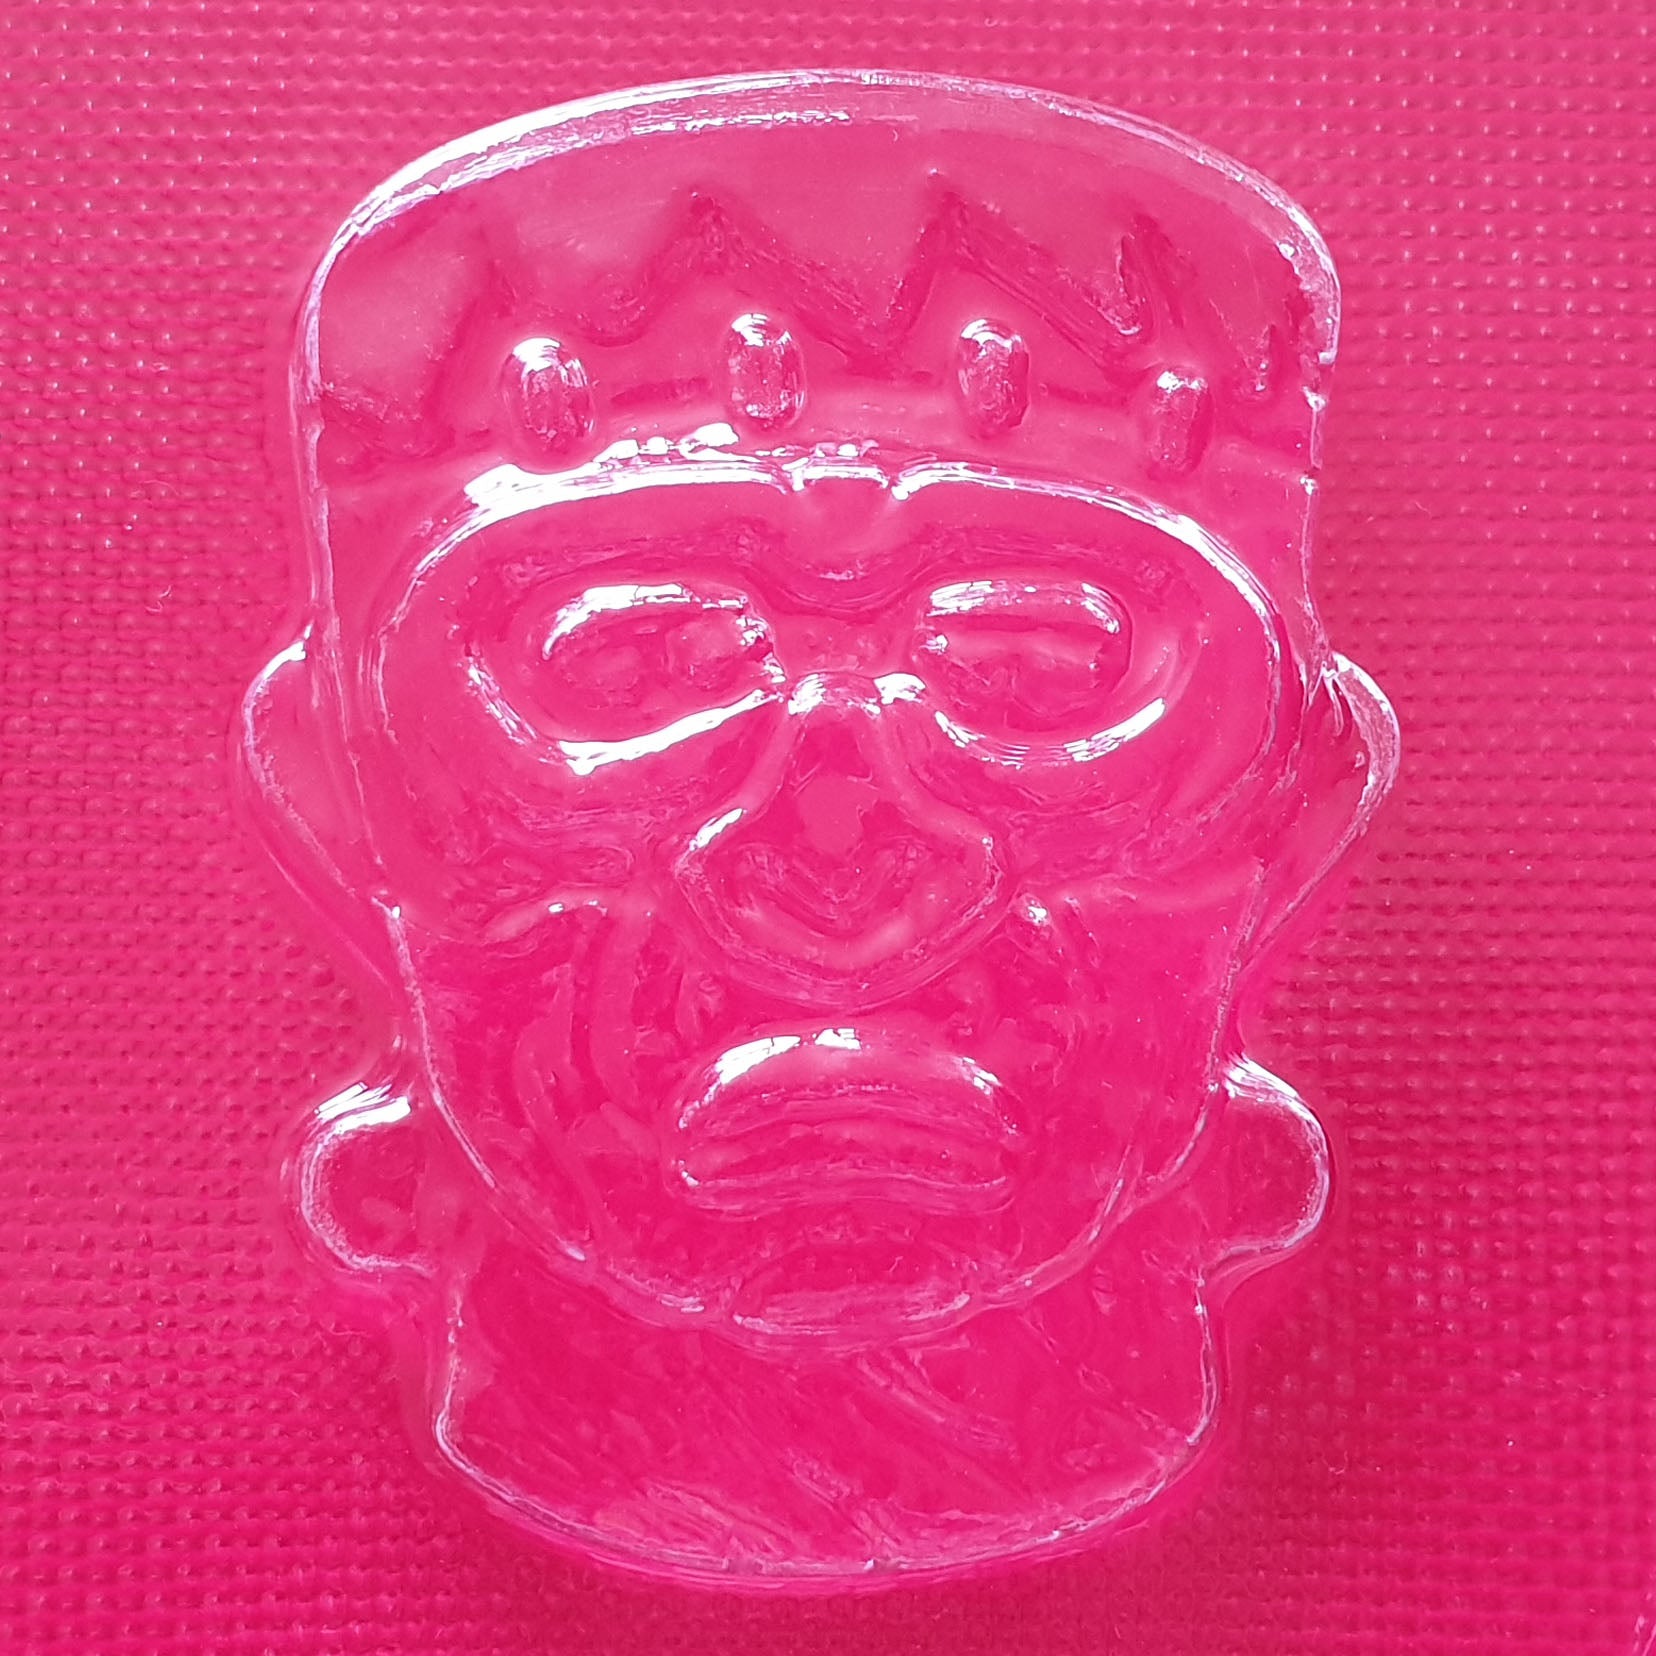 Frankenstein Mould | Truly Personal | Bath Bomb, Soap, Resin, Chocolate, Jelly, Wax Melts Mold